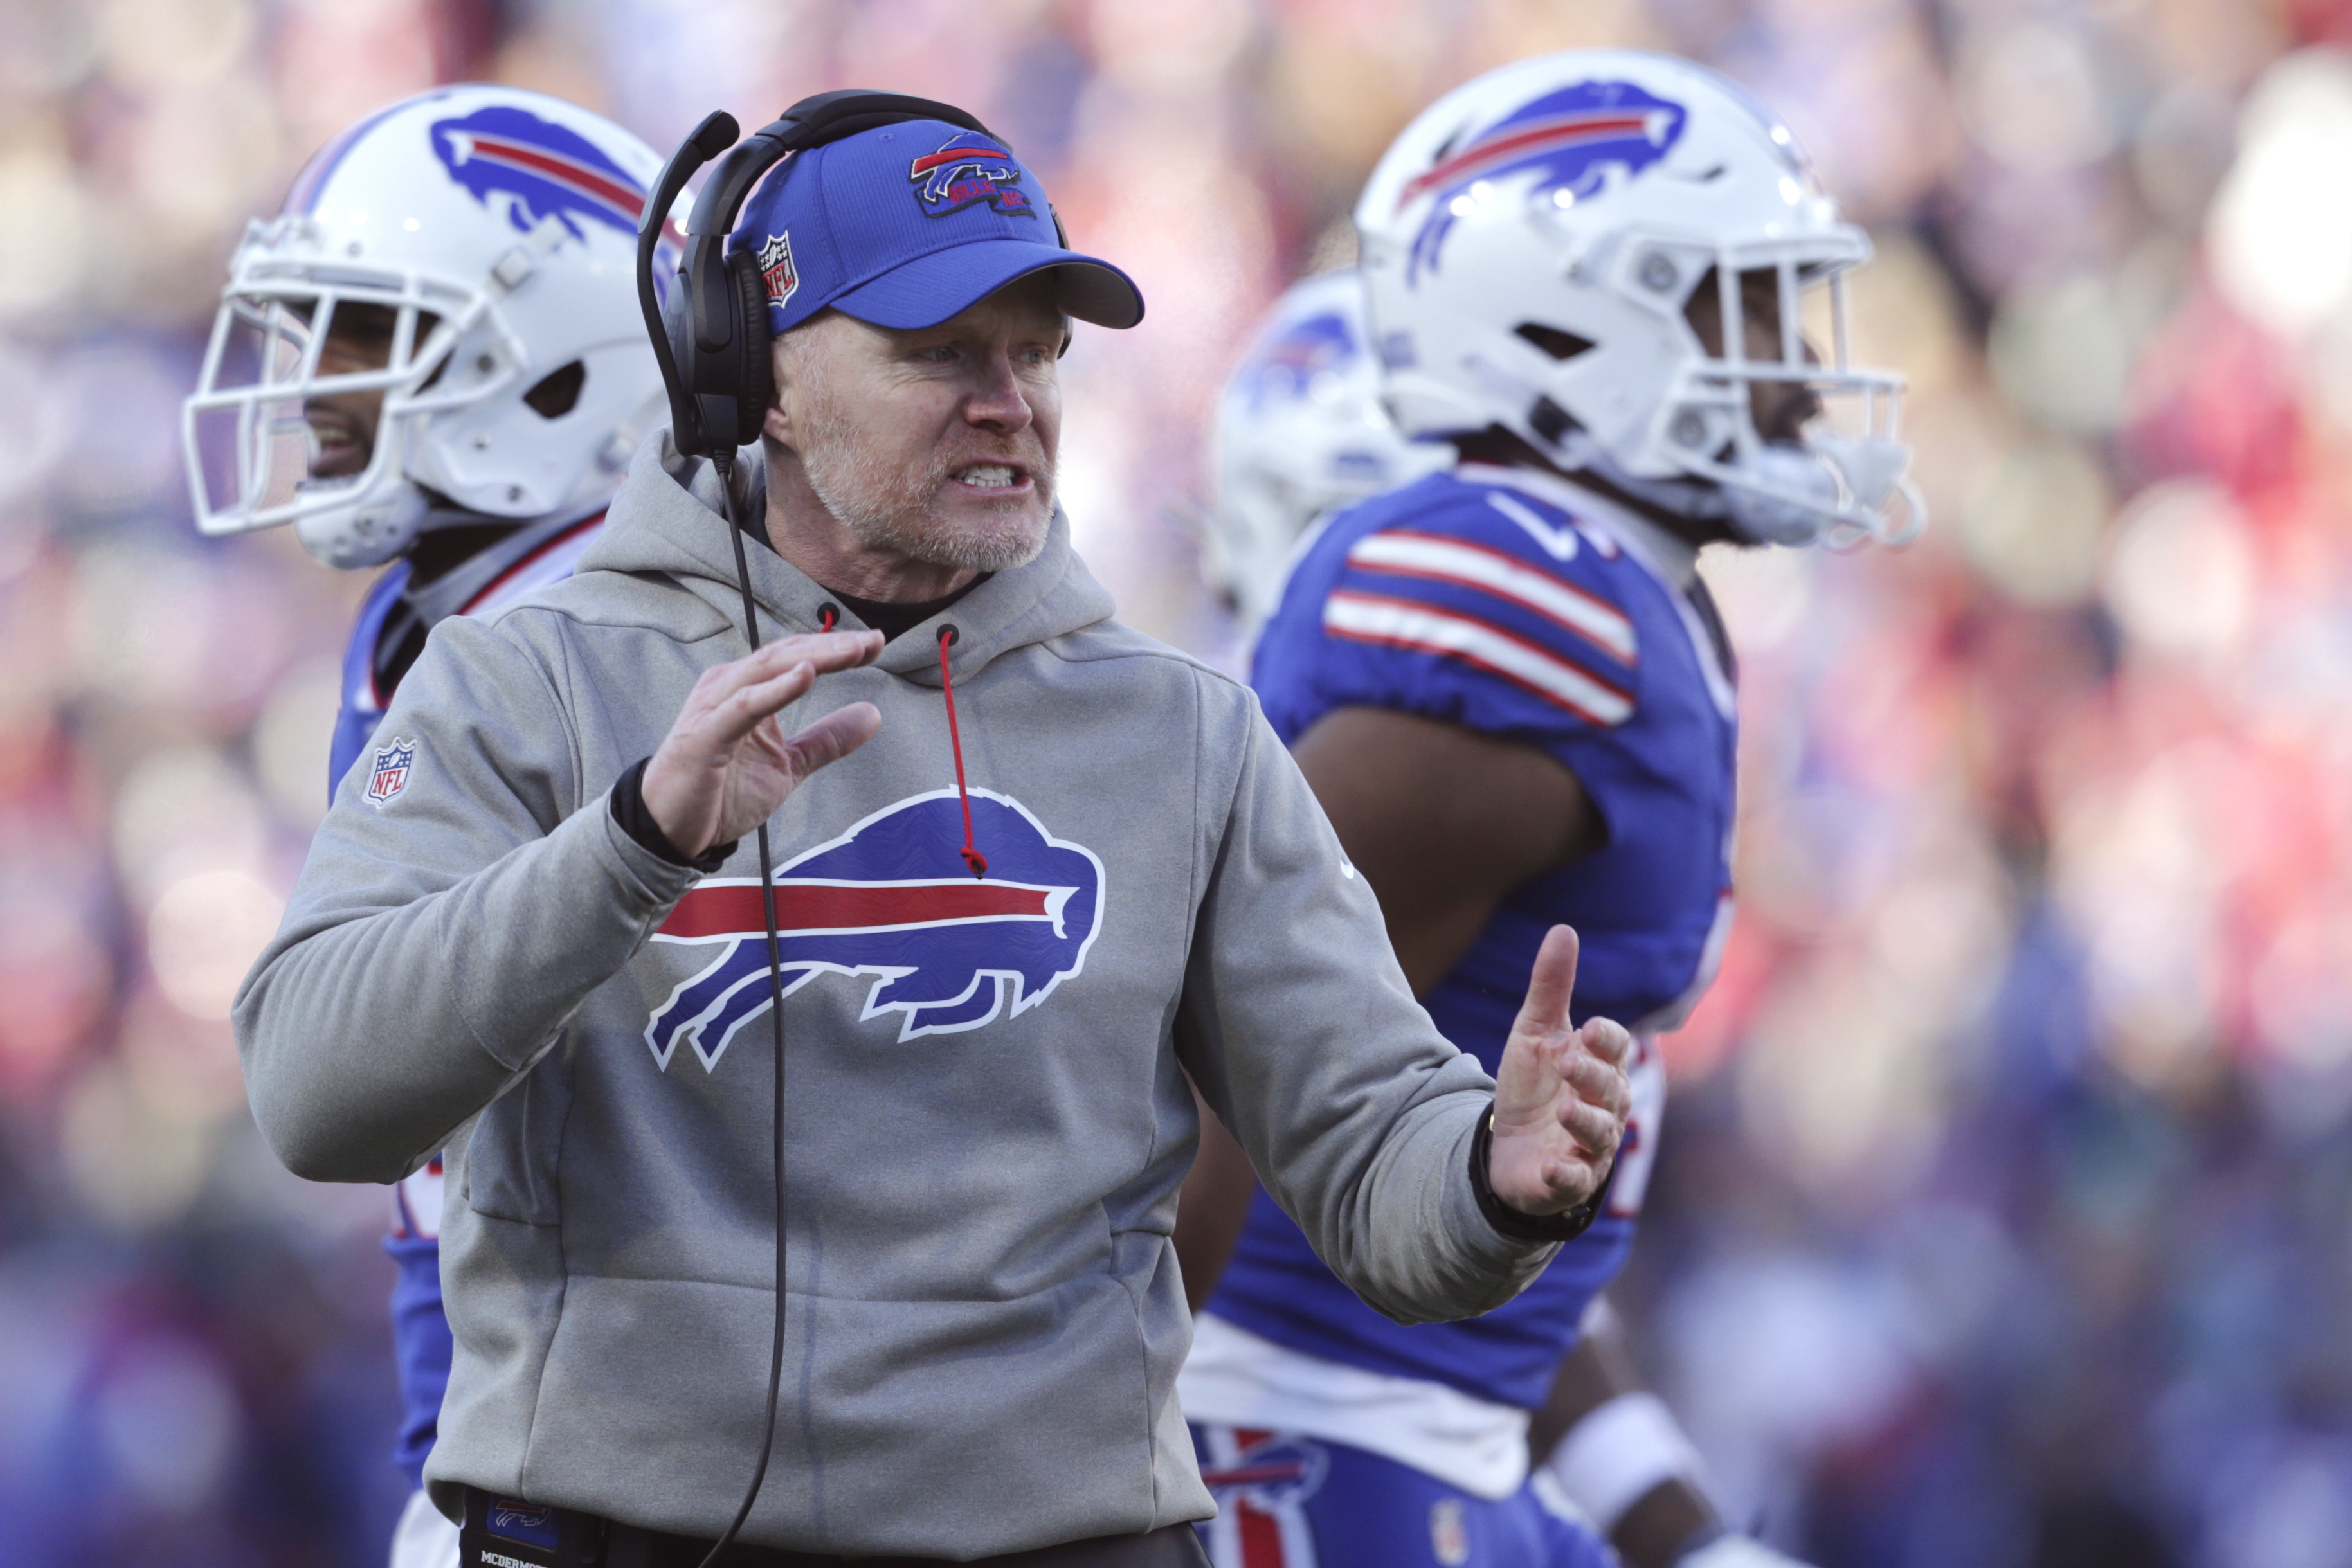 McDermott agrees, Bills getting run over 'something we have to